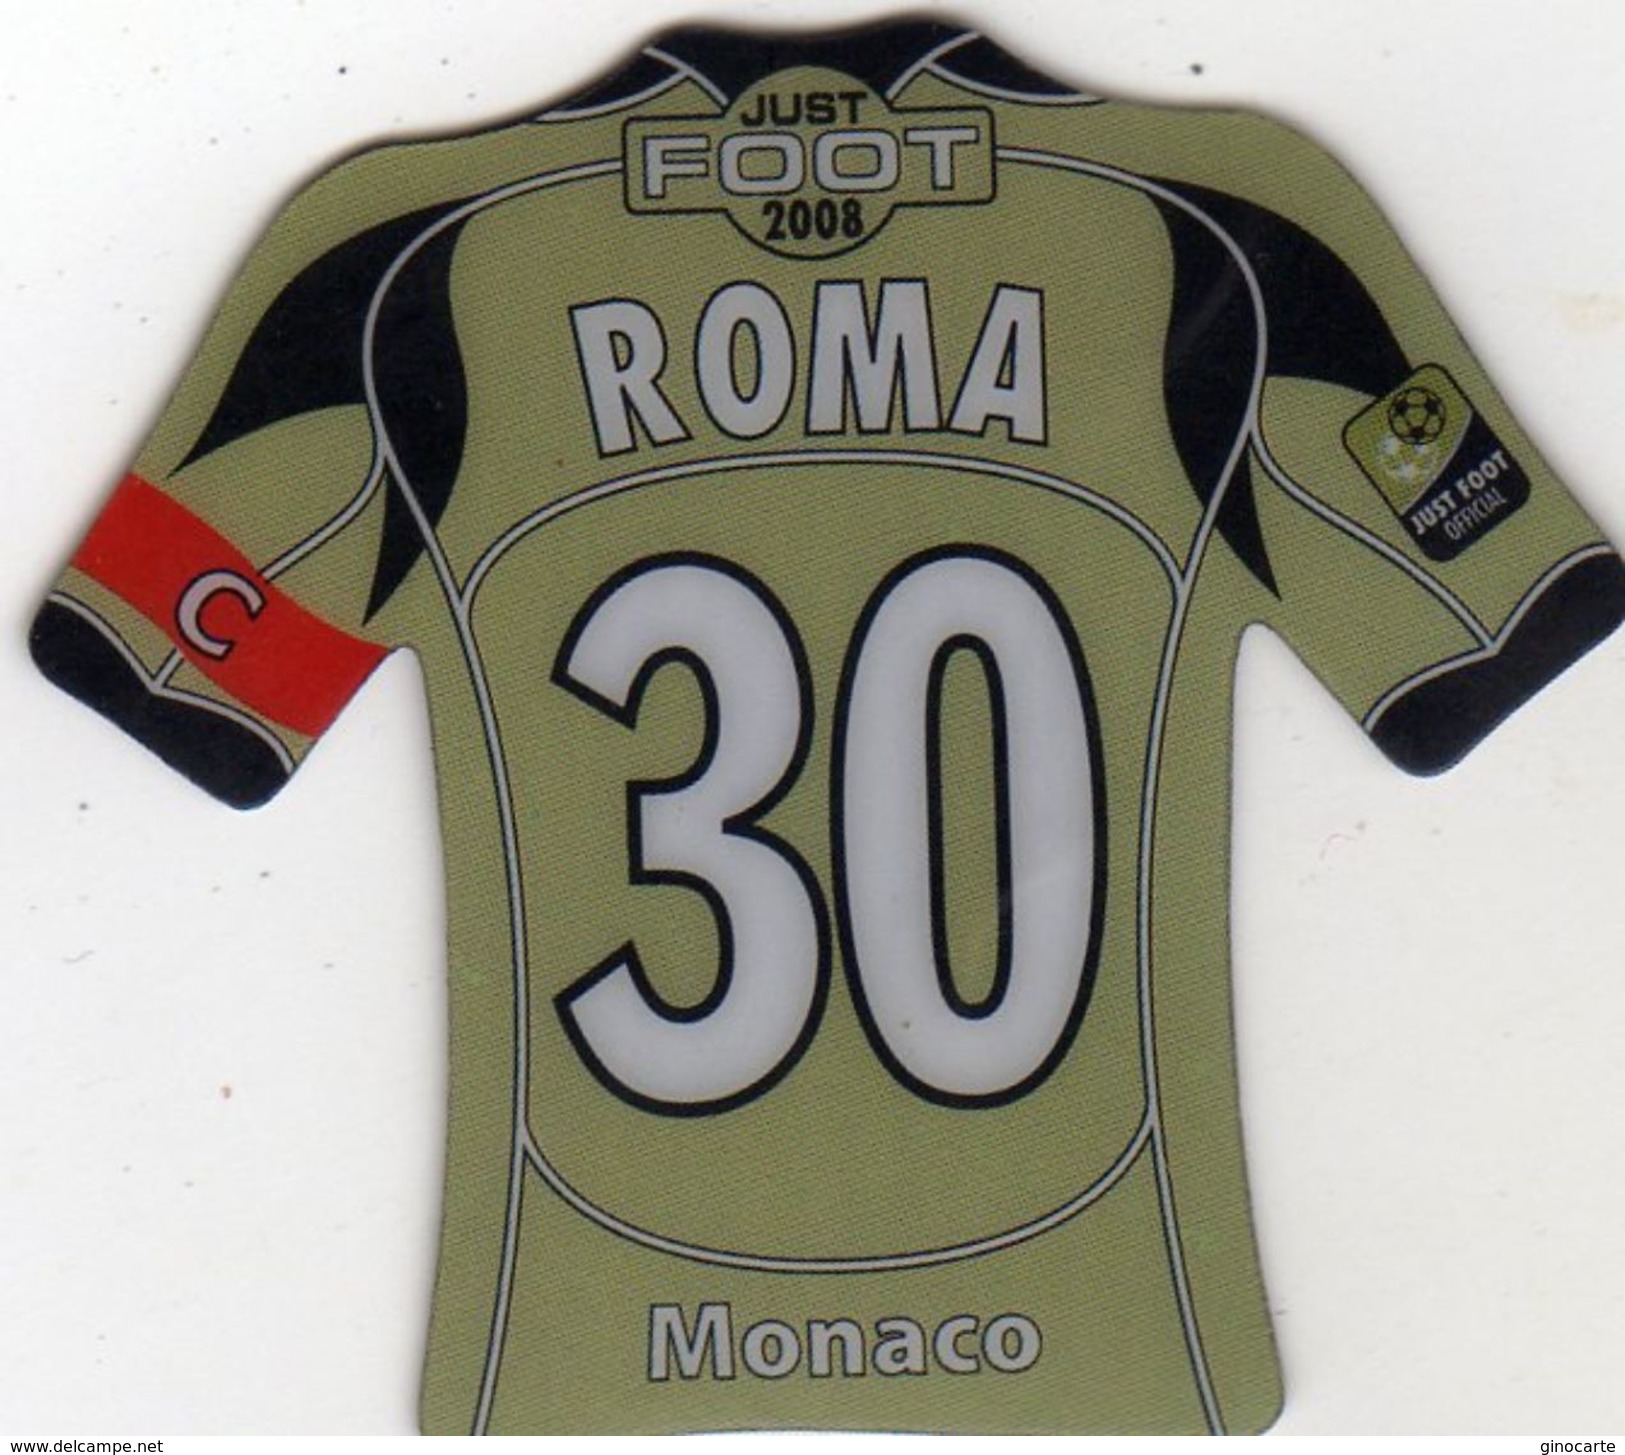 Magnet Magnets Maillot De Football Pitch Monaco Roma 2008 - Sports